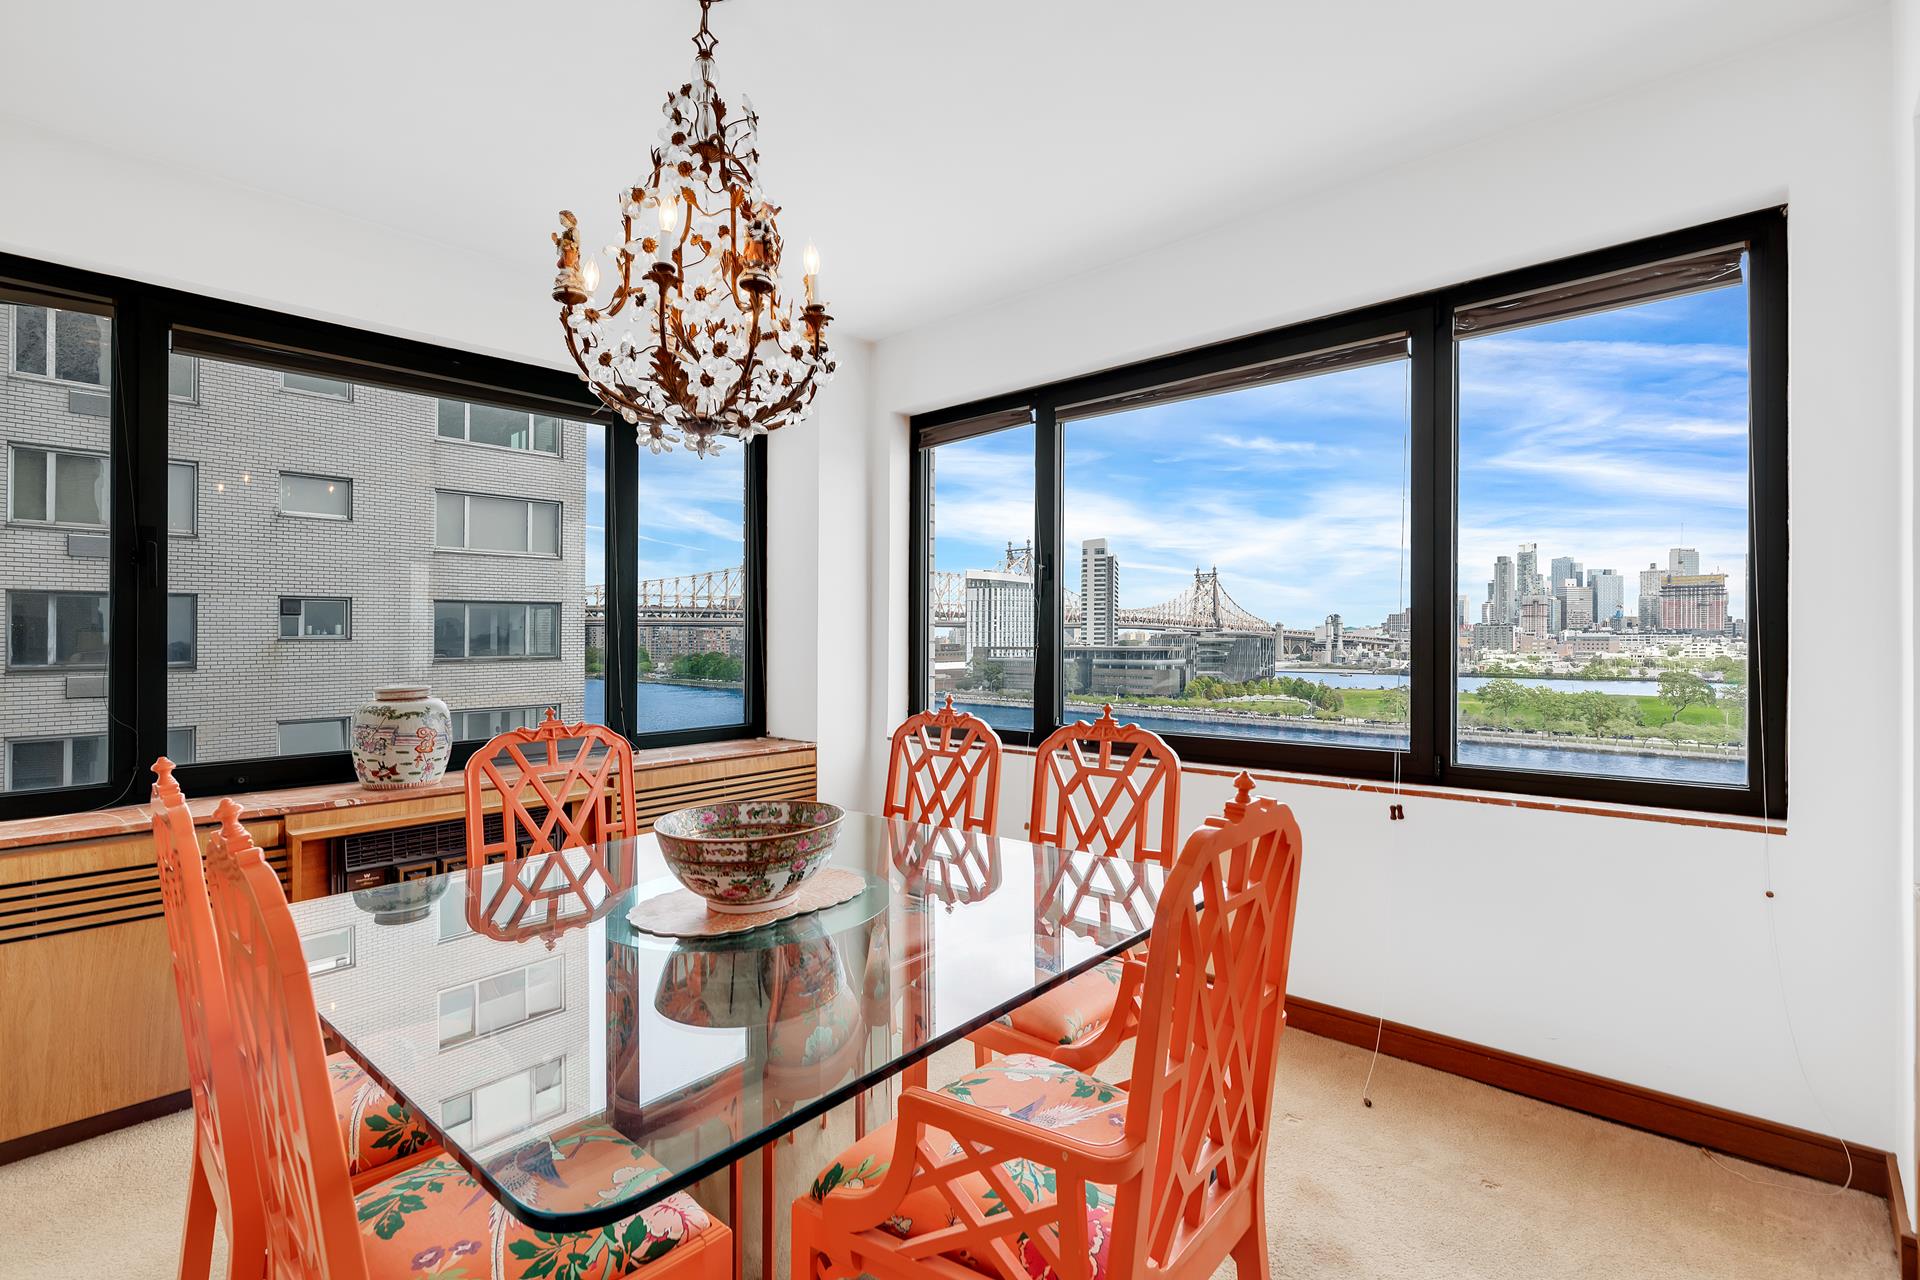 45 Sutton Place 10K, Sutton, Midtown East, NYC - 2 Bedrooms  
2 Bathrooms  
6 Rooms - 